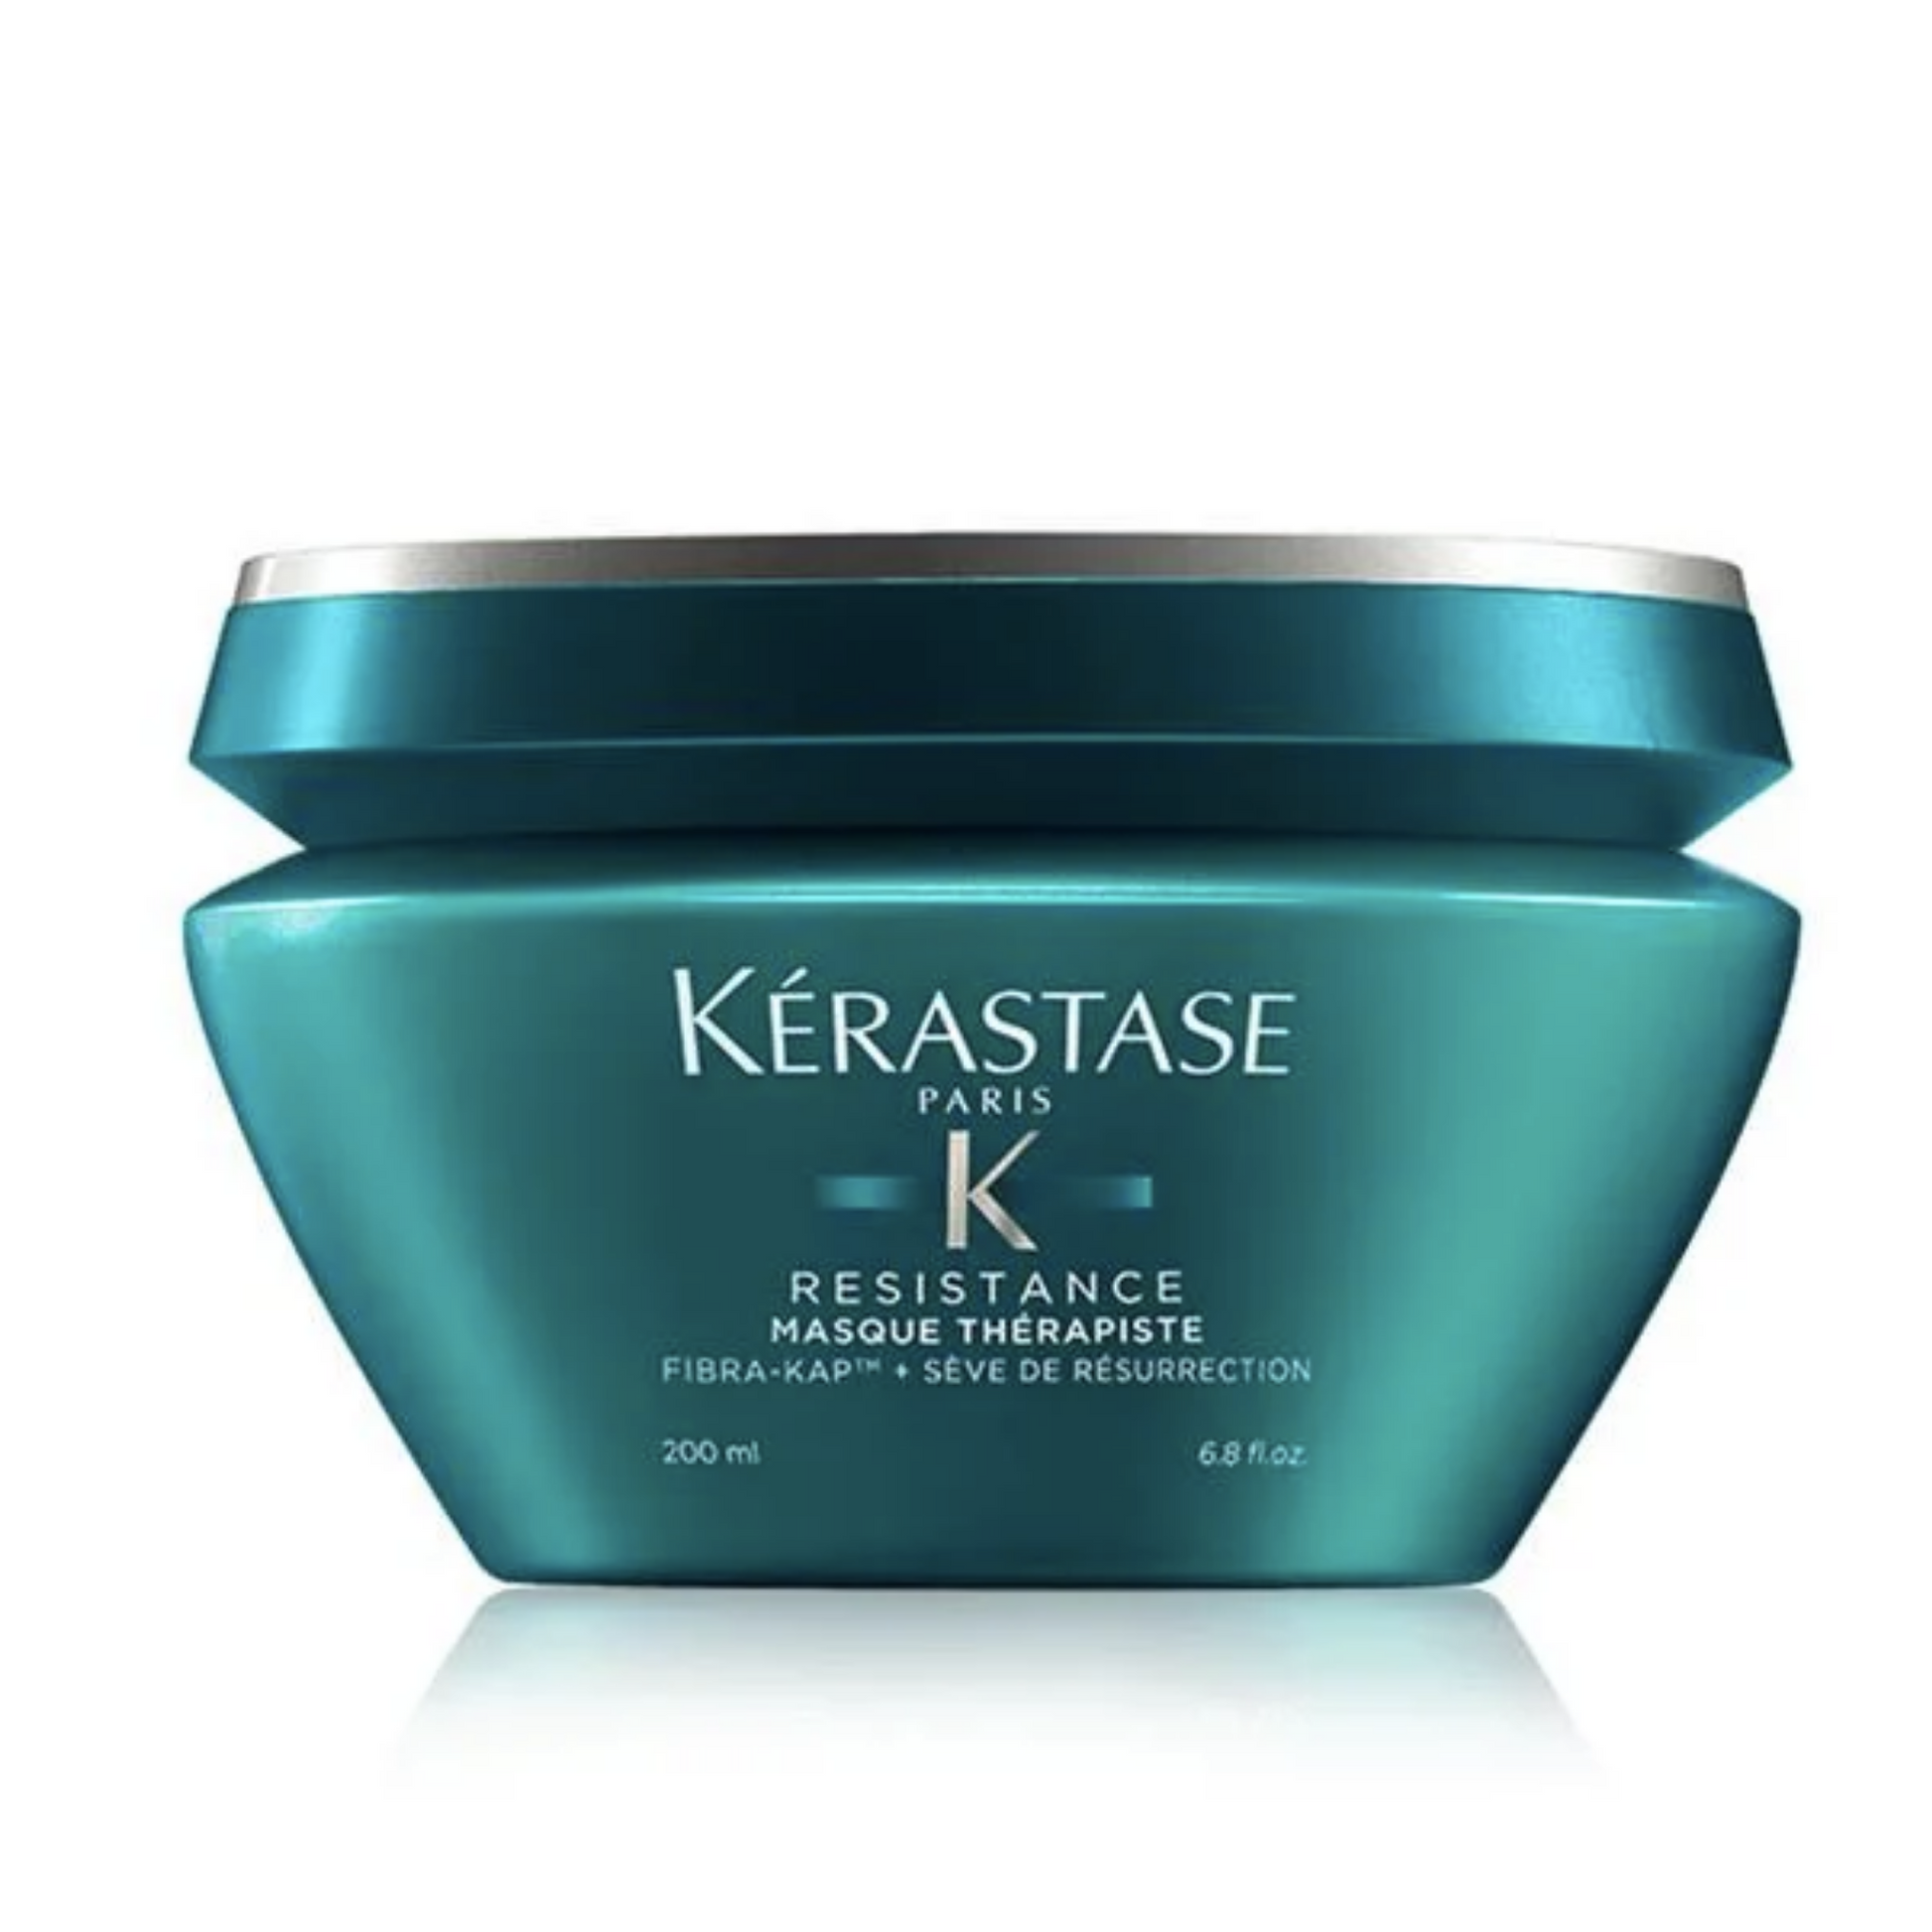 Masque Therapiste Hair Mask- Repairing hair mask for weak, over-processed and damaged hair.